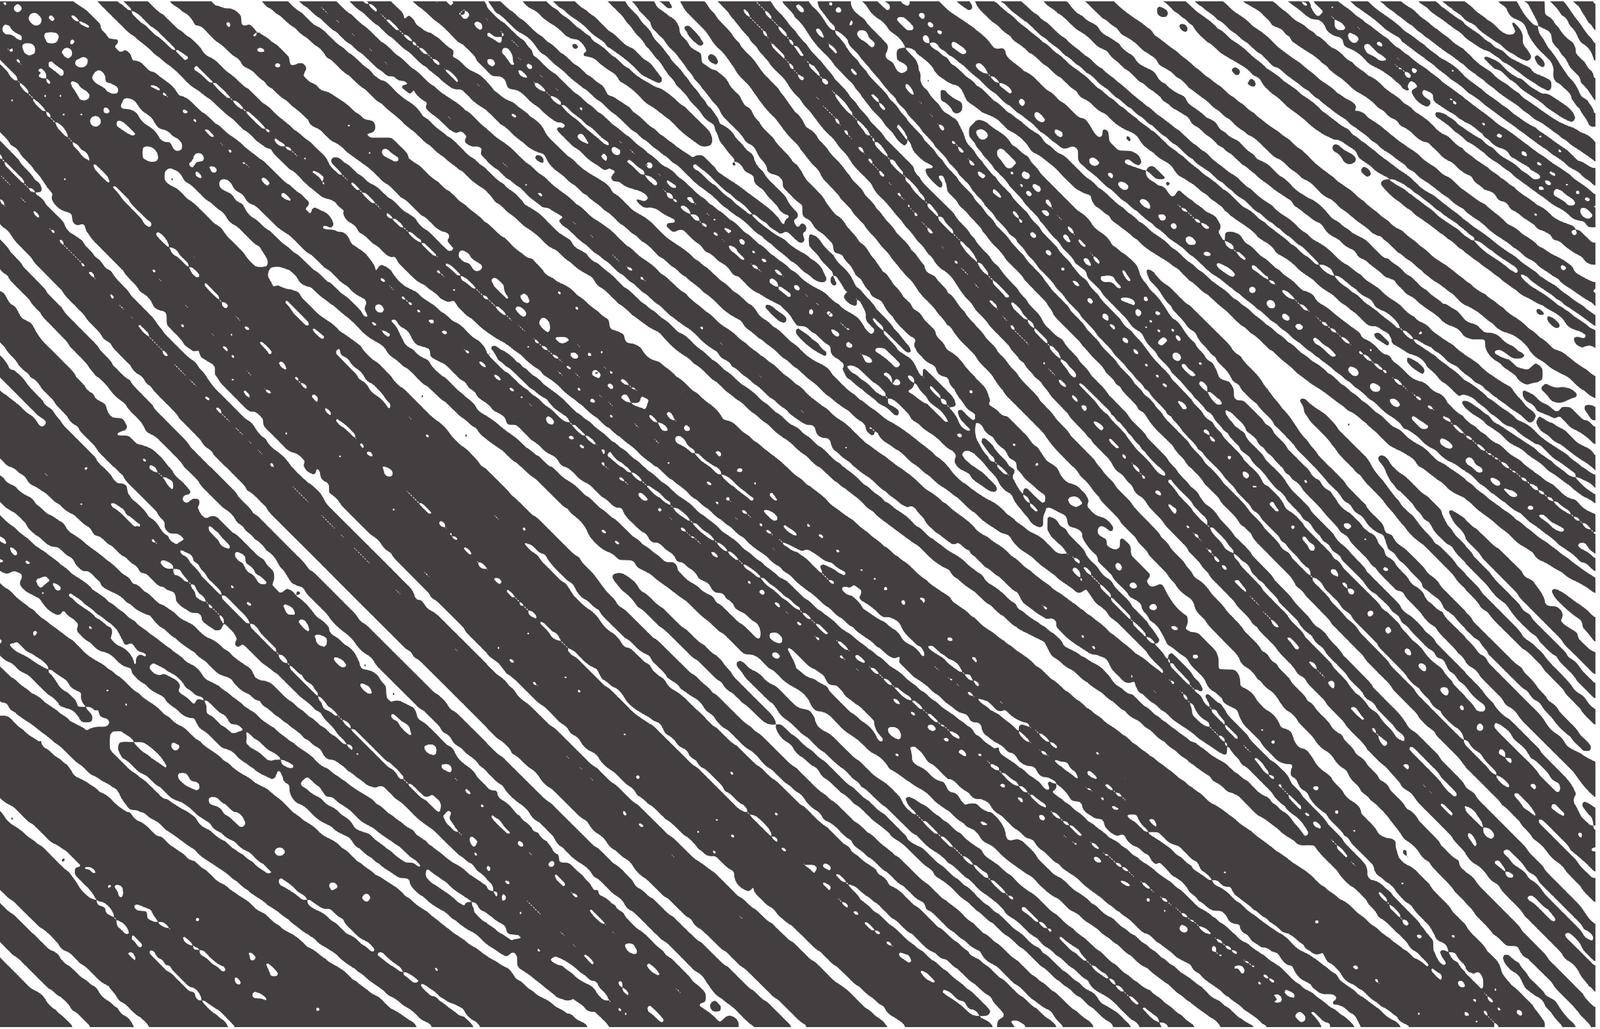 Grunge texture. Distress black grey rough trace. Astonishing background. Noise dirty grunge texture. Graceful artistic surface. Vector illustration.